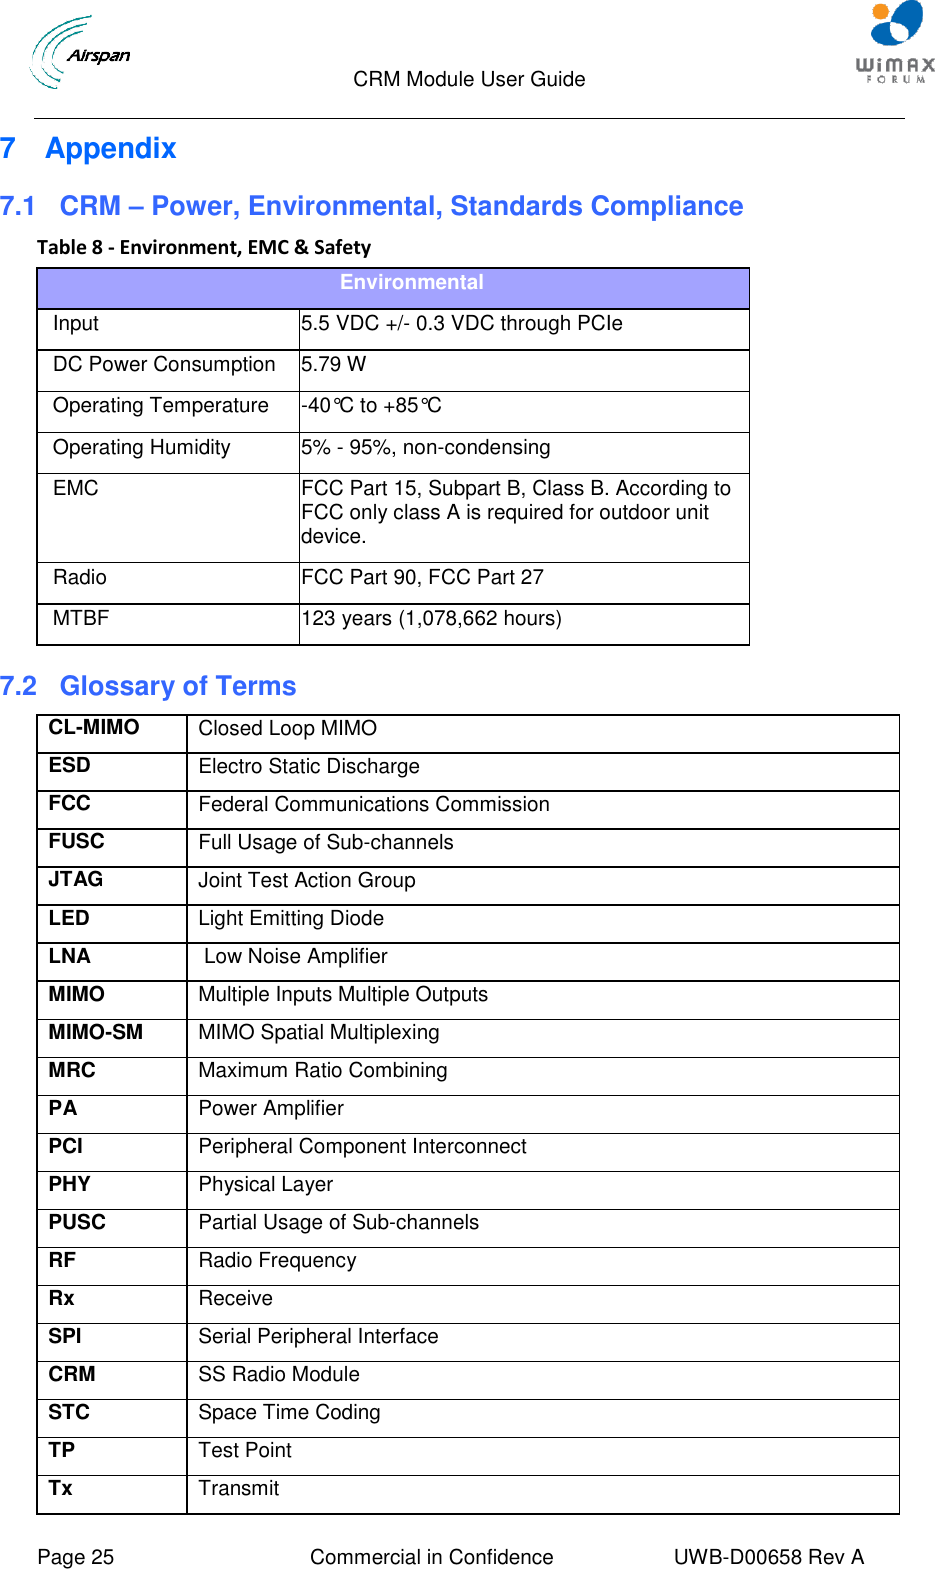                                  CRM Module User Guide     Page 25  Commercial in Confidence  UWB-D00658 Rev A    7  Appendix 7.1 CRM – Power, Environmental, Standards Compliance Table 8 - Environment, EMC &amp; Safety Environmental Input  5.5 VDC +/- 0.3 VDC through PCIe  DC Power Consumption 5.79 W Operating Temperature -40°C to +85°C Operating Humidity 5% - 95%, non-condensing EMC FCC Part 15, Subpart B, Class B. According to FCC only class A is required for outdoor unit device. Radio FCC Part 90, FCC Part 27   MTBF 123 years (1,078,662 hours) 7.2  Glossary of Terms CL-MIMO    Closed Loop MIMO ESD Electro Static Discharge FCC               Federal Communications Commission FUSC Full Usage of Sub-channels JTAG Joint Test Action Group LED Light Emitting Diode LNA  Low Noise Amplifier MIMO Multiple Inputs Multiple Outputs MIMO-SM    MIMO Spatial Multiplexing MRC Maximum Ratio Combining PA Power Amplifier PCI Peripheral Component Interconnect PHY Physical Layer PUSC Partial Usage of Sub-channels RF Radio Frequency Rx Receive SPI Serial Peripheral Interface CRM SS Radio Module STC Space Time Coding TP Test Point Tx Transmit 